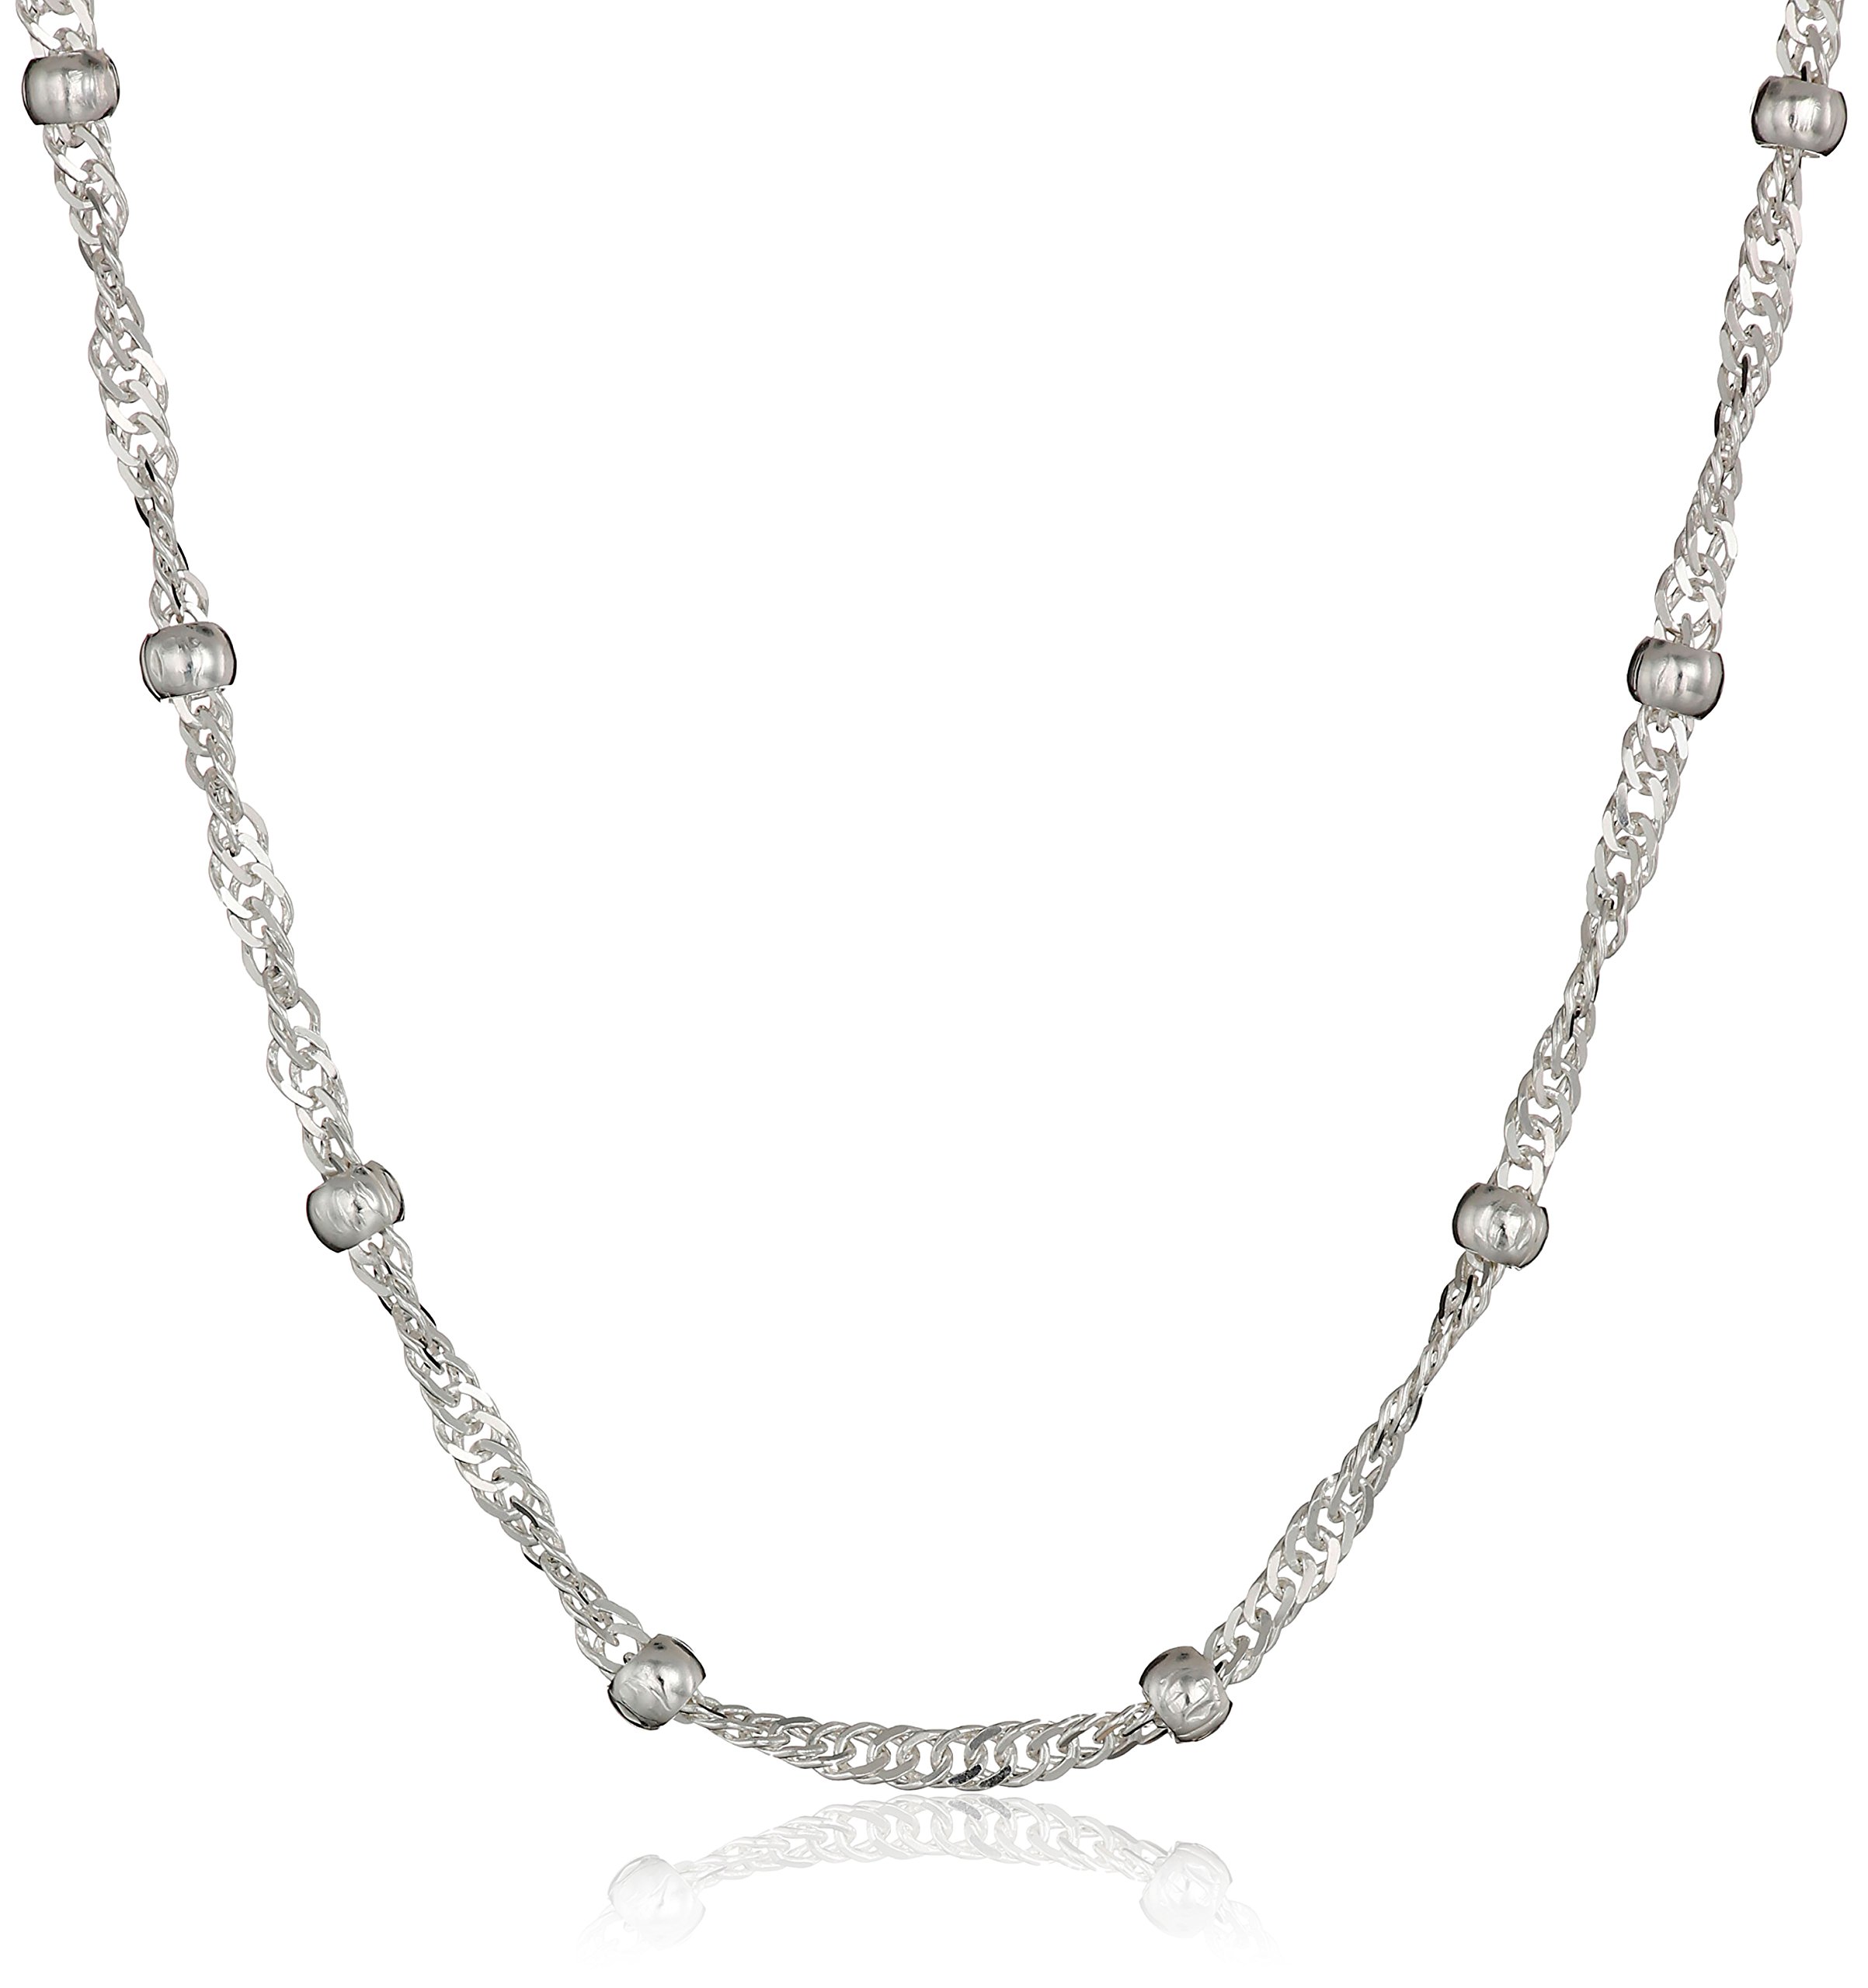 Amazon Essentials Sterling Silver Singapore Bead Chain Station Necklace